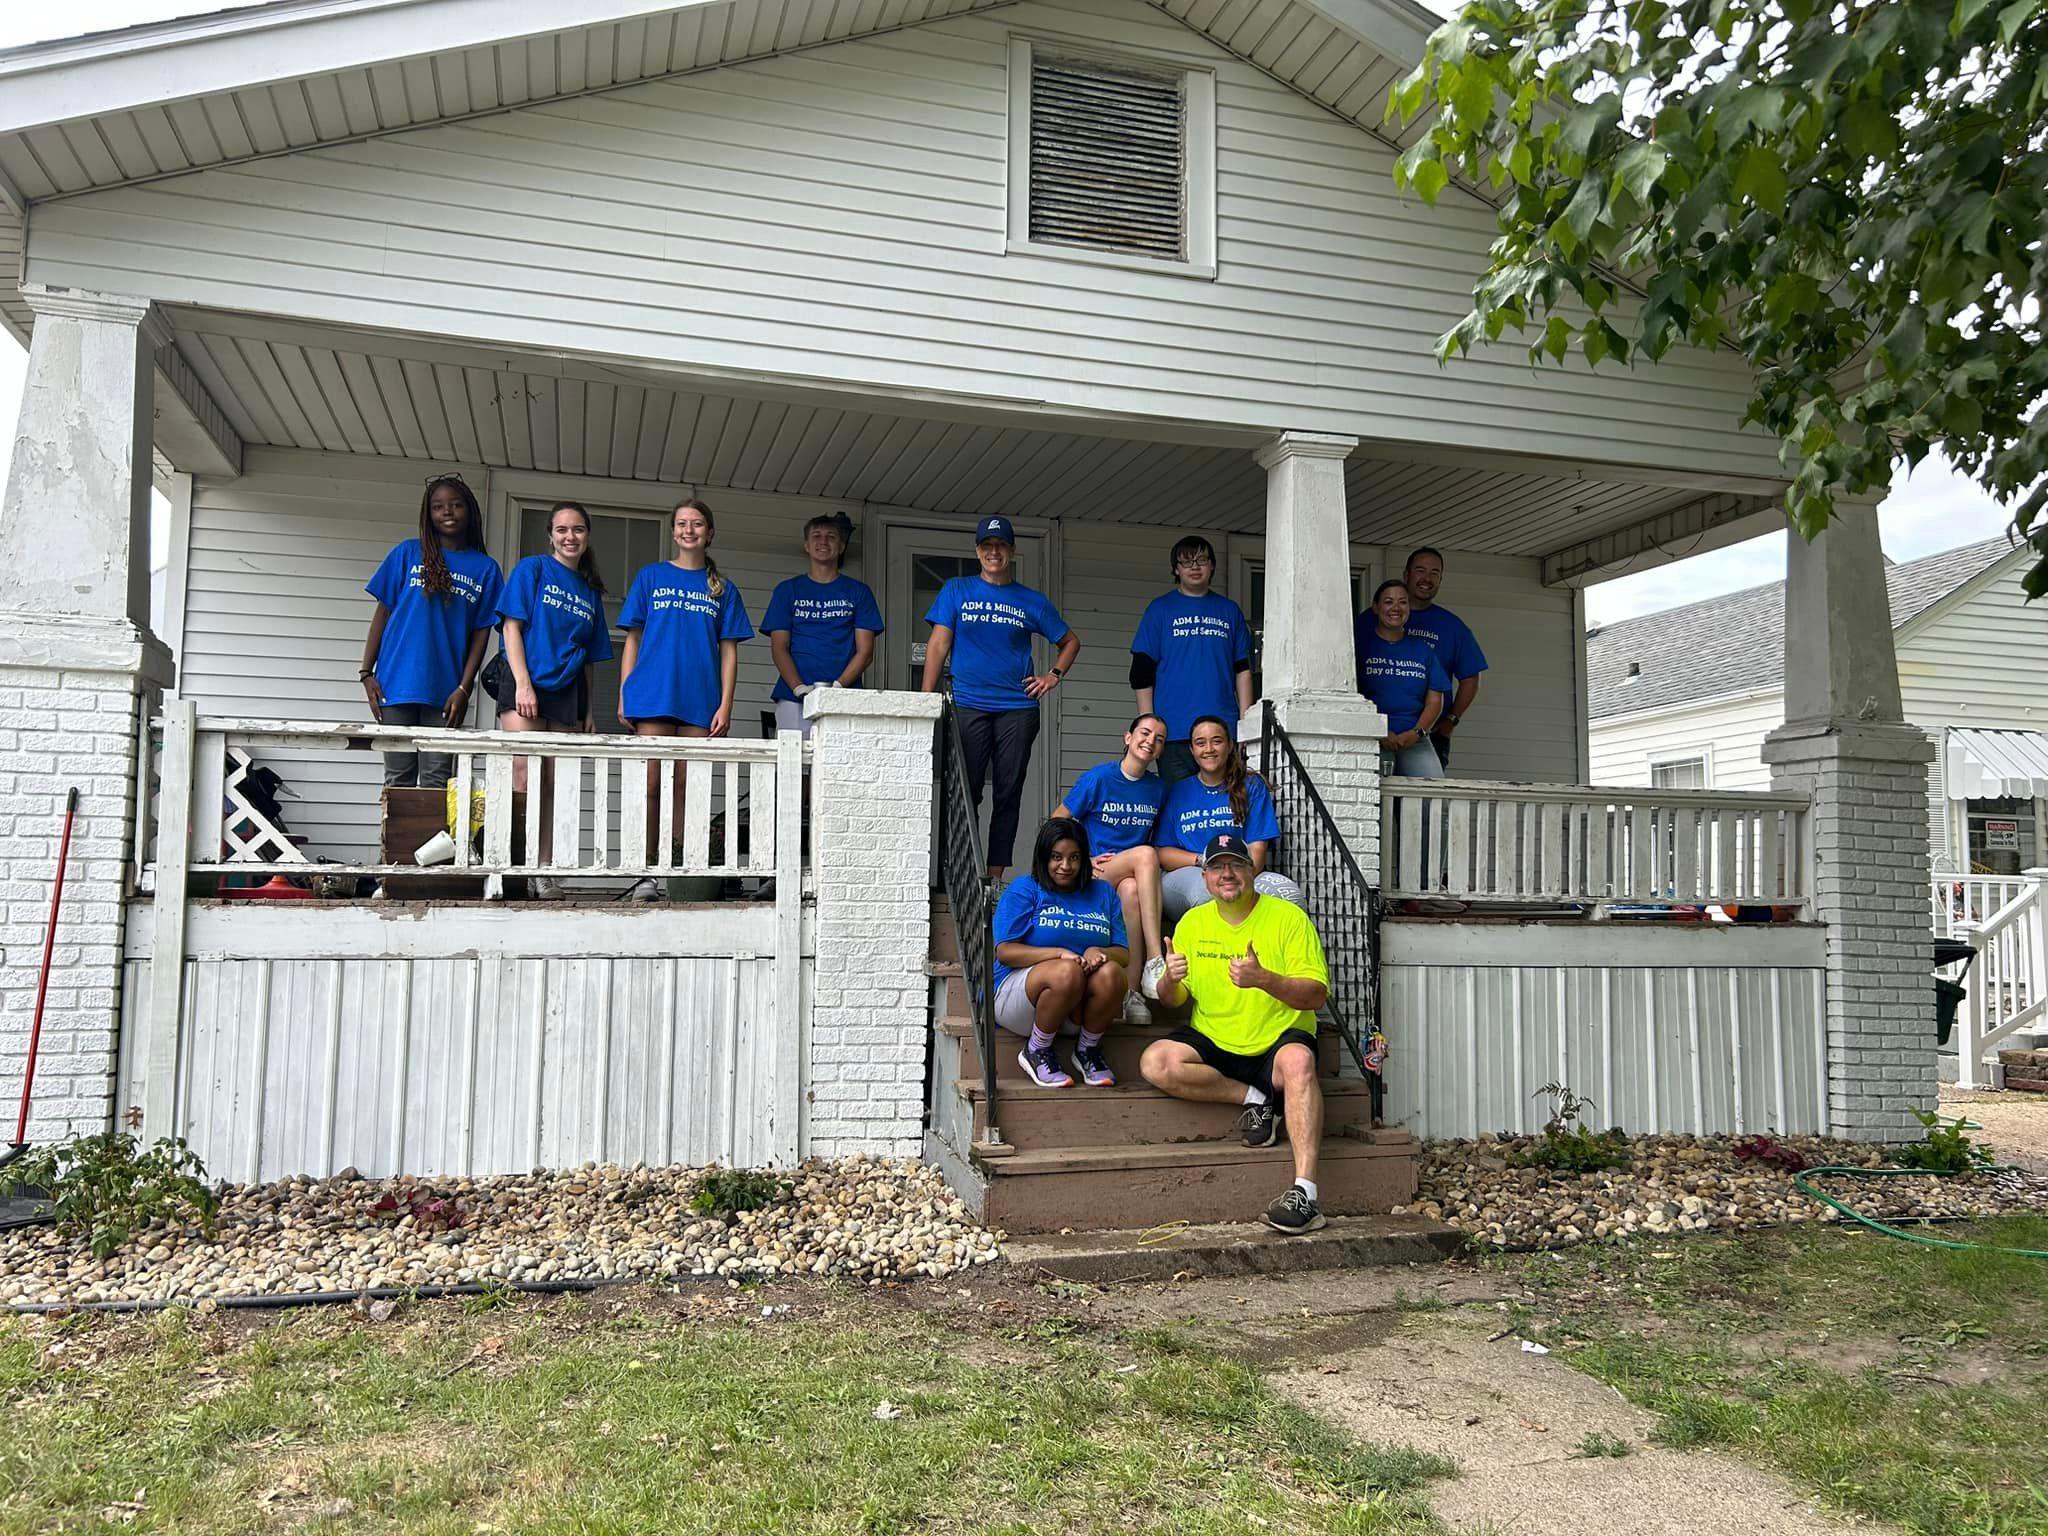 Had another great Block by Block morning with volunteers from ADM and Millikin!   Thank you for helping make our city more beautiful.    This work was done in just two hours!
Scroll through to see some before and after.   Amazing what can be done in just a couple of hours!